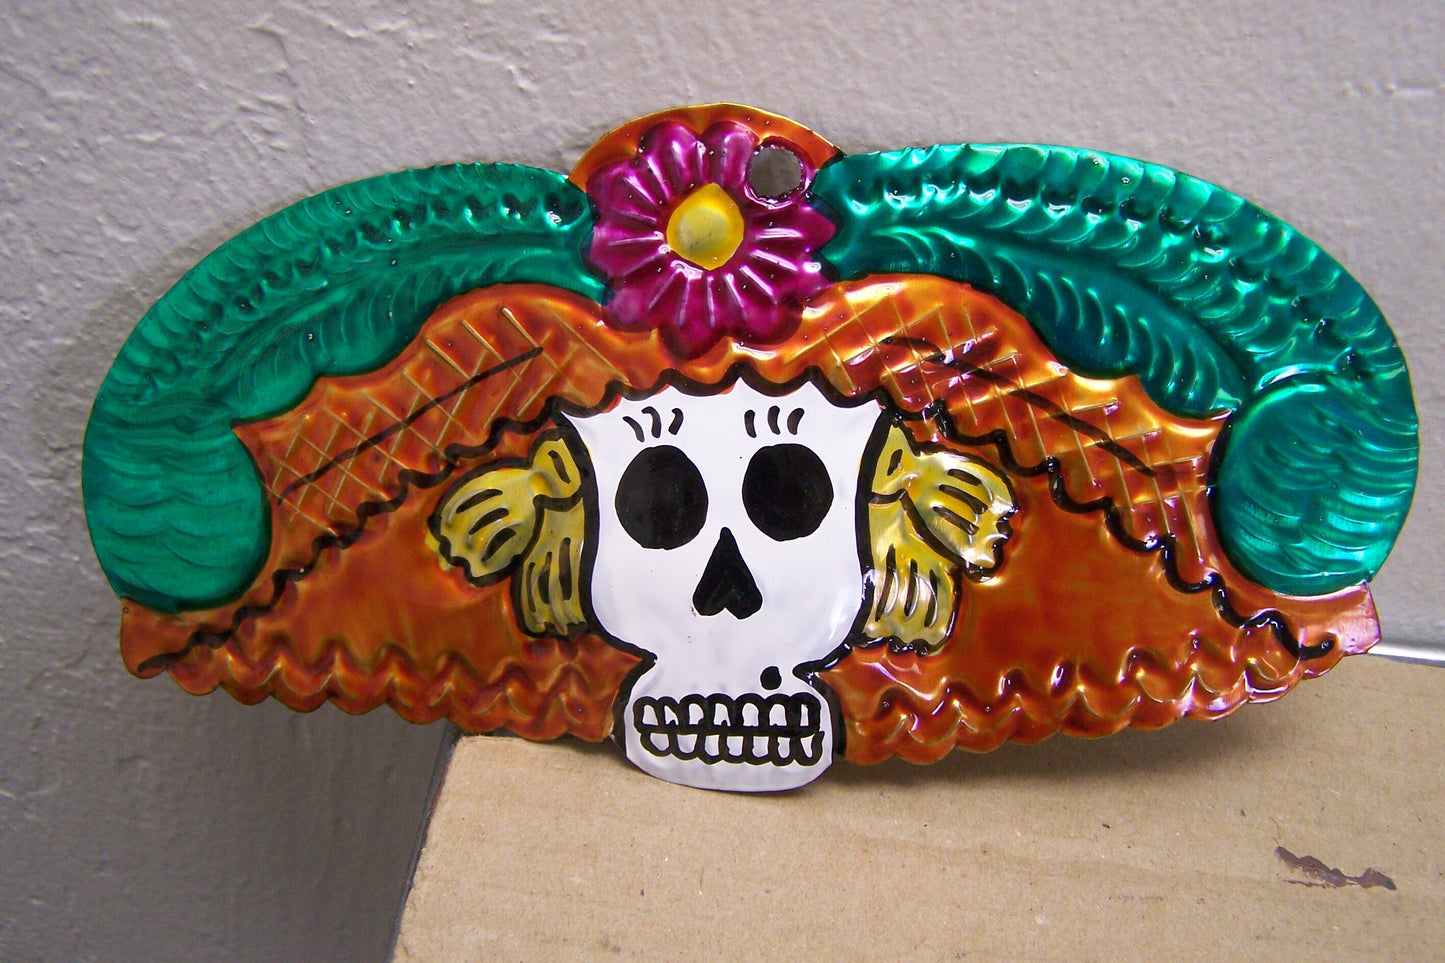 Painted Tin Day of the Dead Female Skeleton Head Catrina Ornament - Mexico